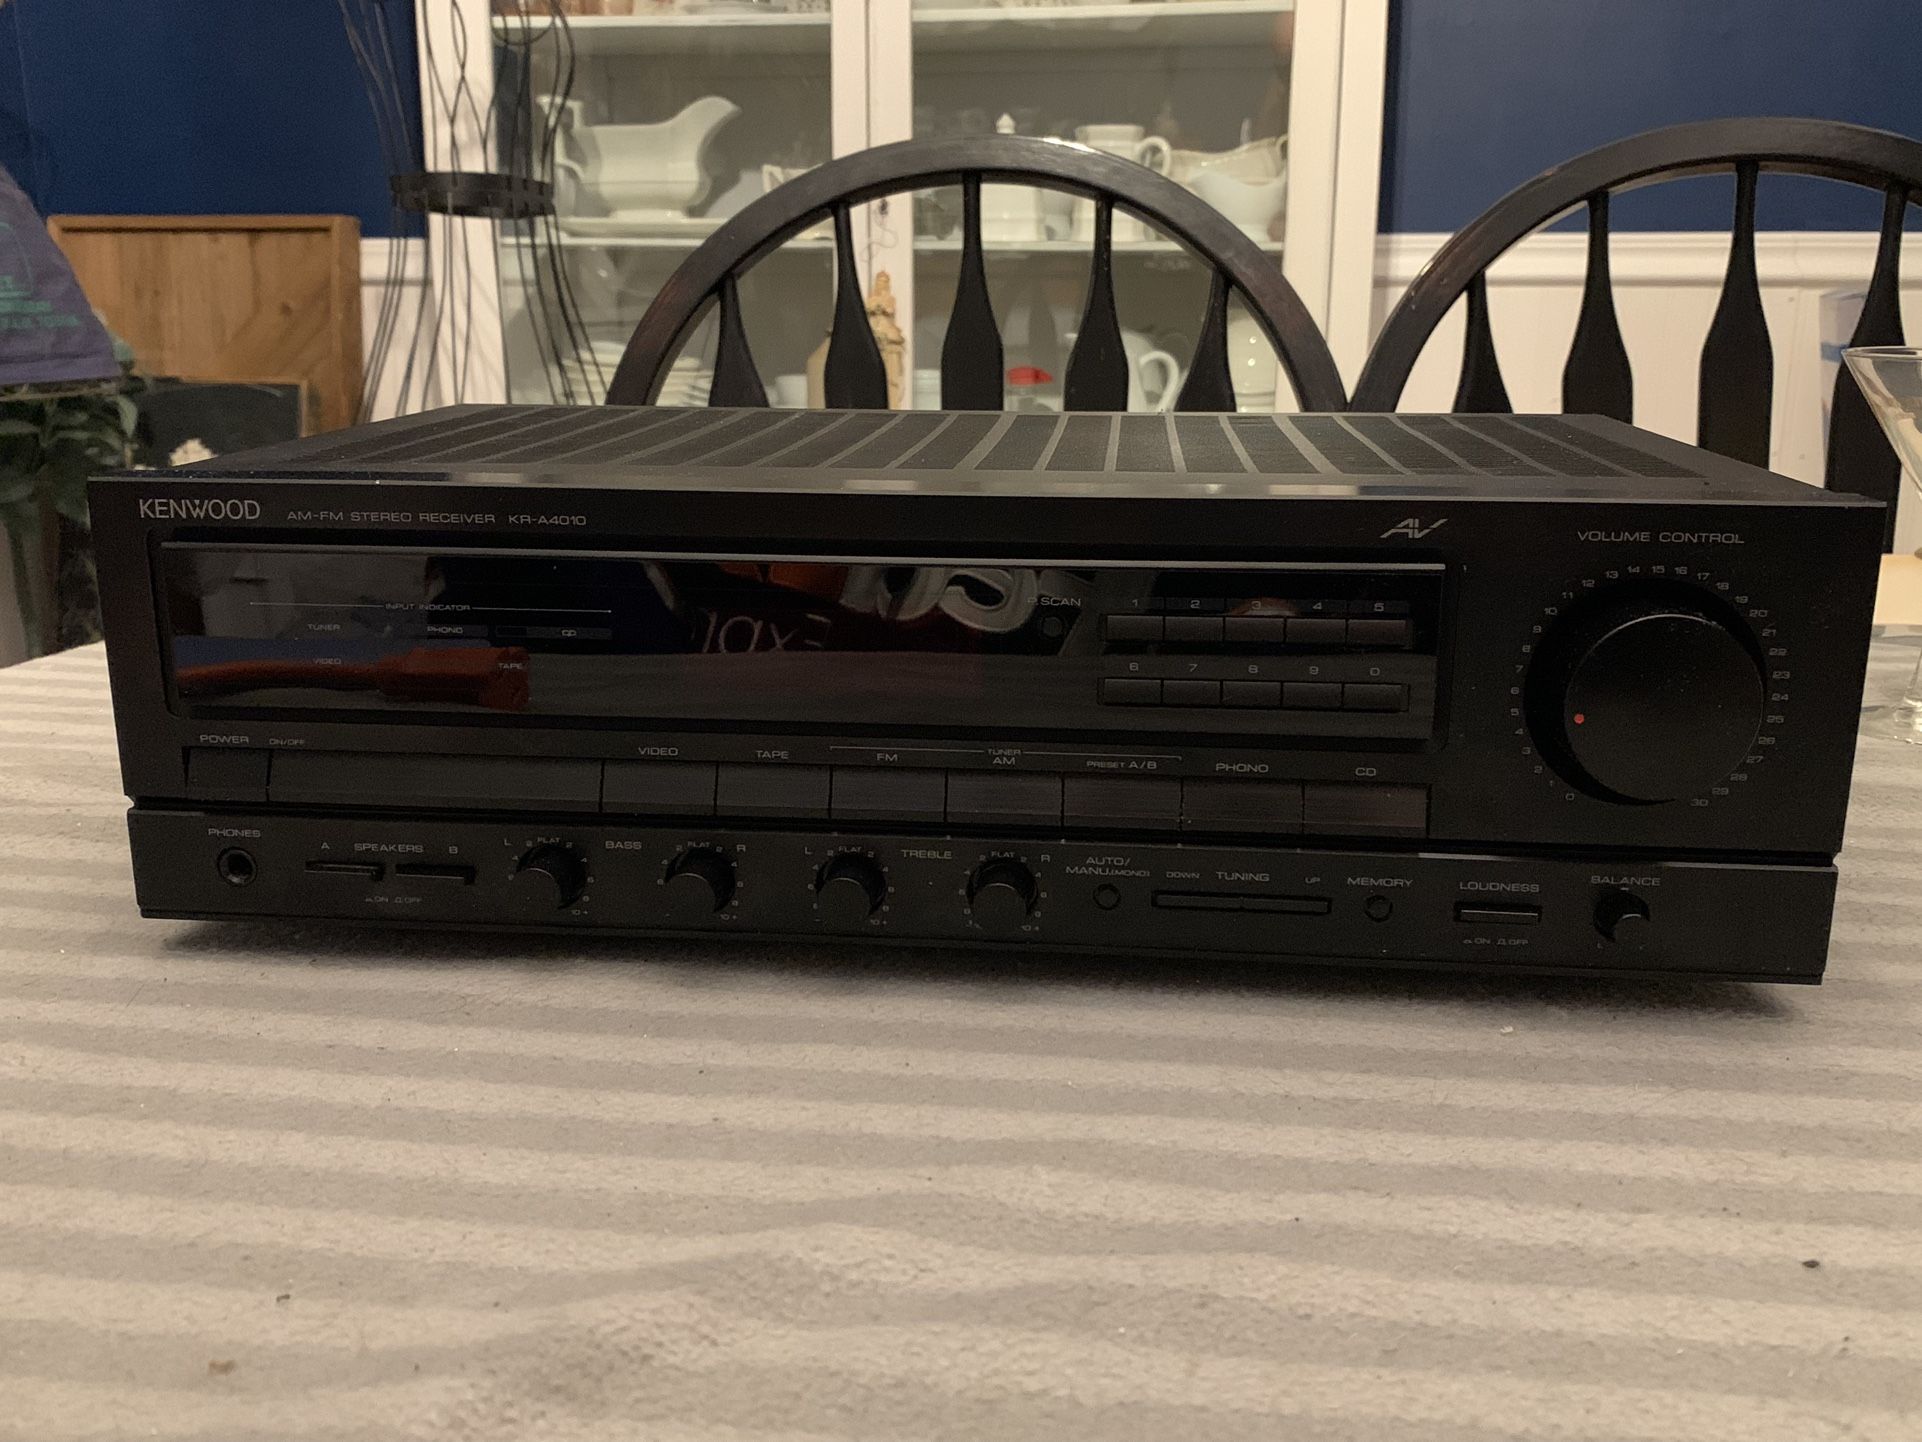 Kenwood AM-FM Stereo Receiver